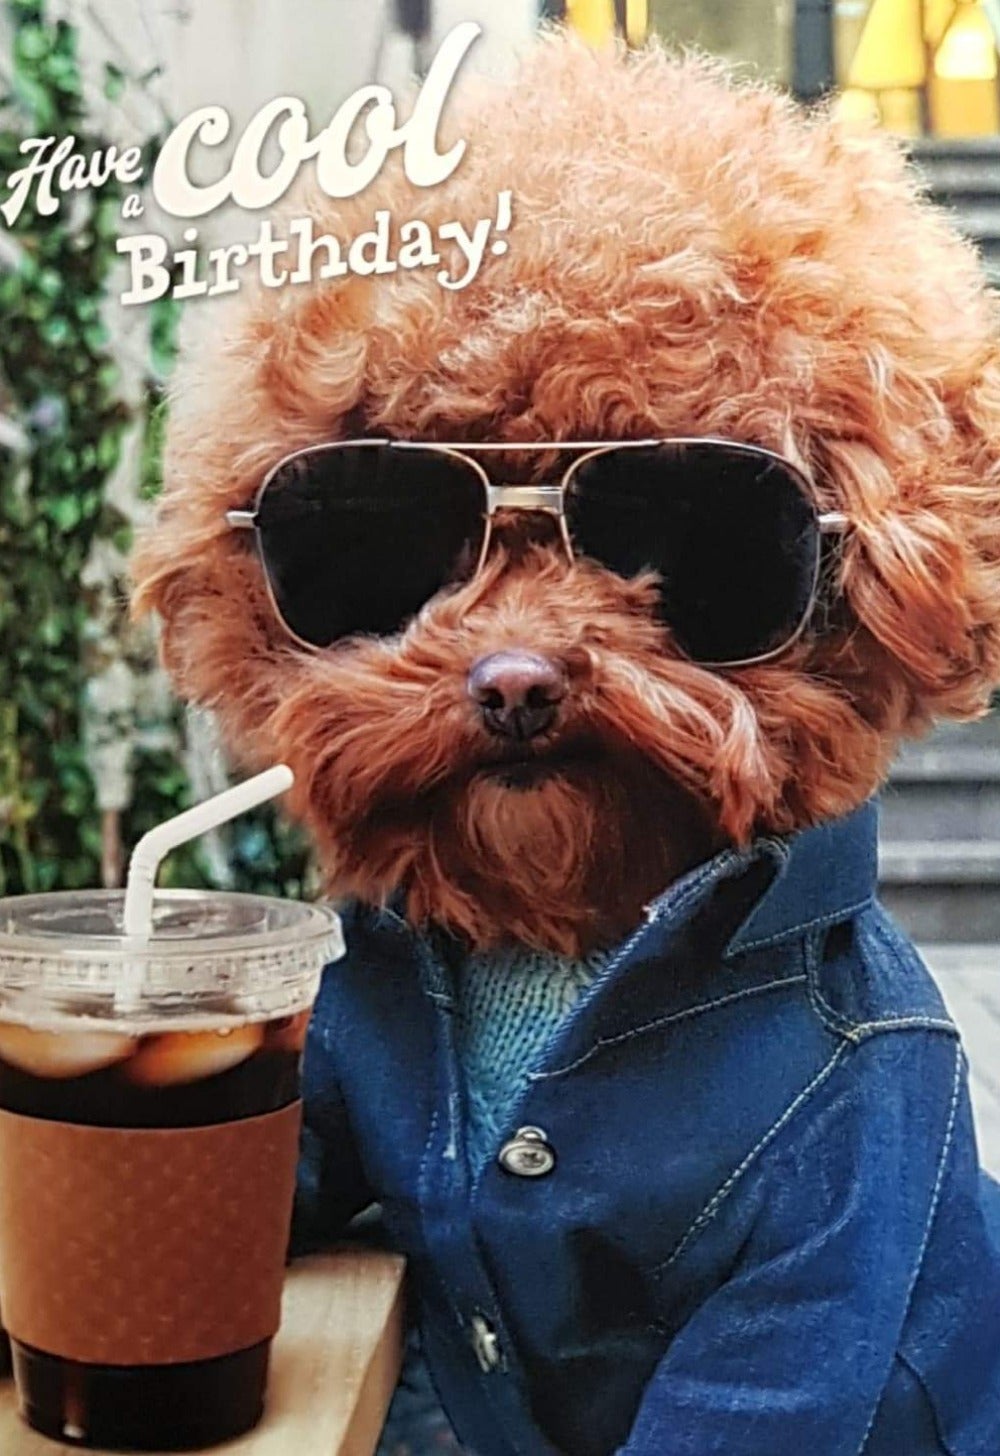 Birthday Card - Humour / Have A Cool Birthday